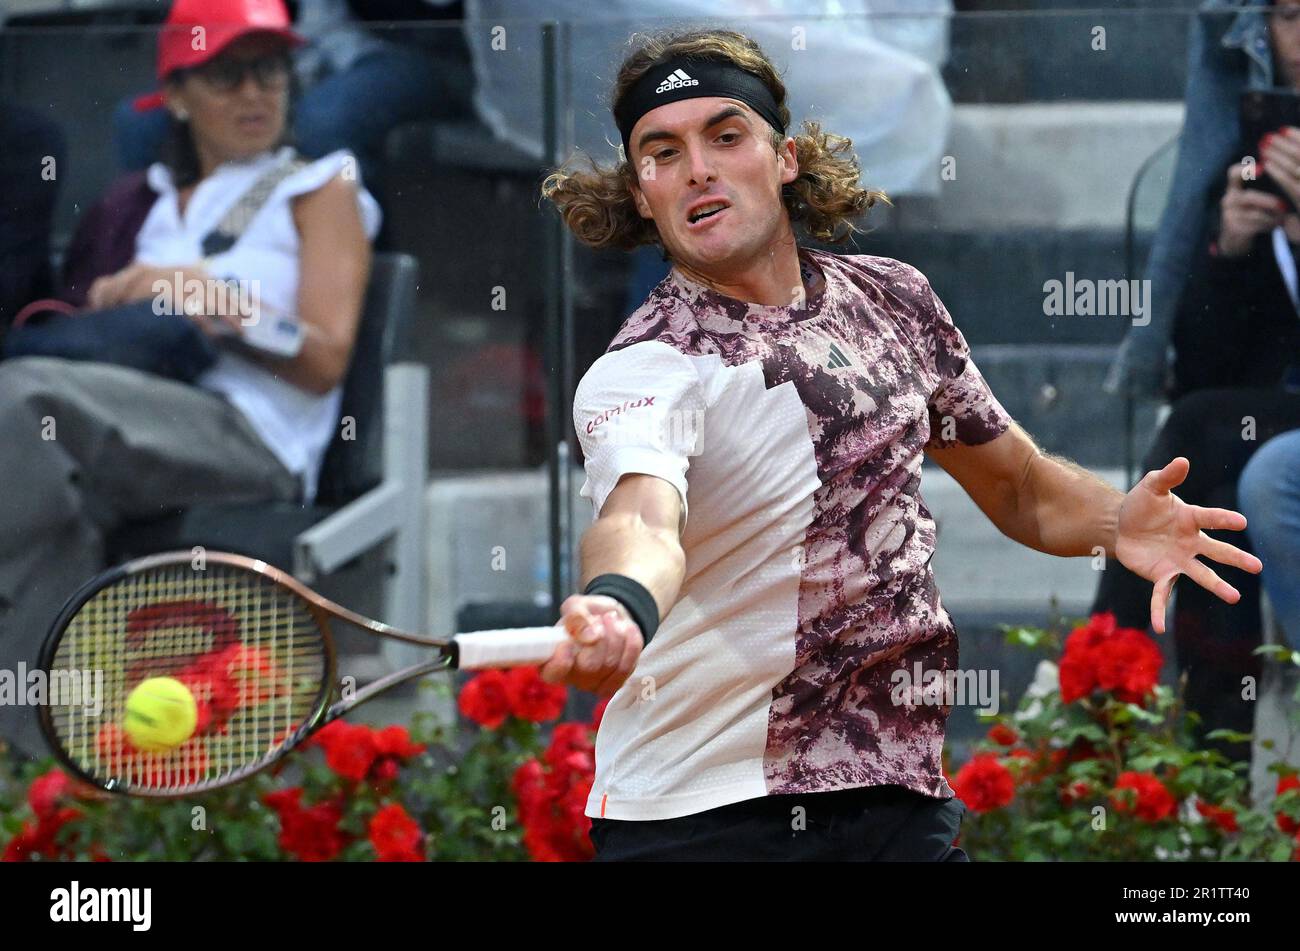 May 16, 2023, ROME: Lorenzo Sonego of Italy celebrates a point during his  men's singles third round match against Stefanos Tsitsipas of Greece (not  pictured) at the Italian Open tennis tournament in